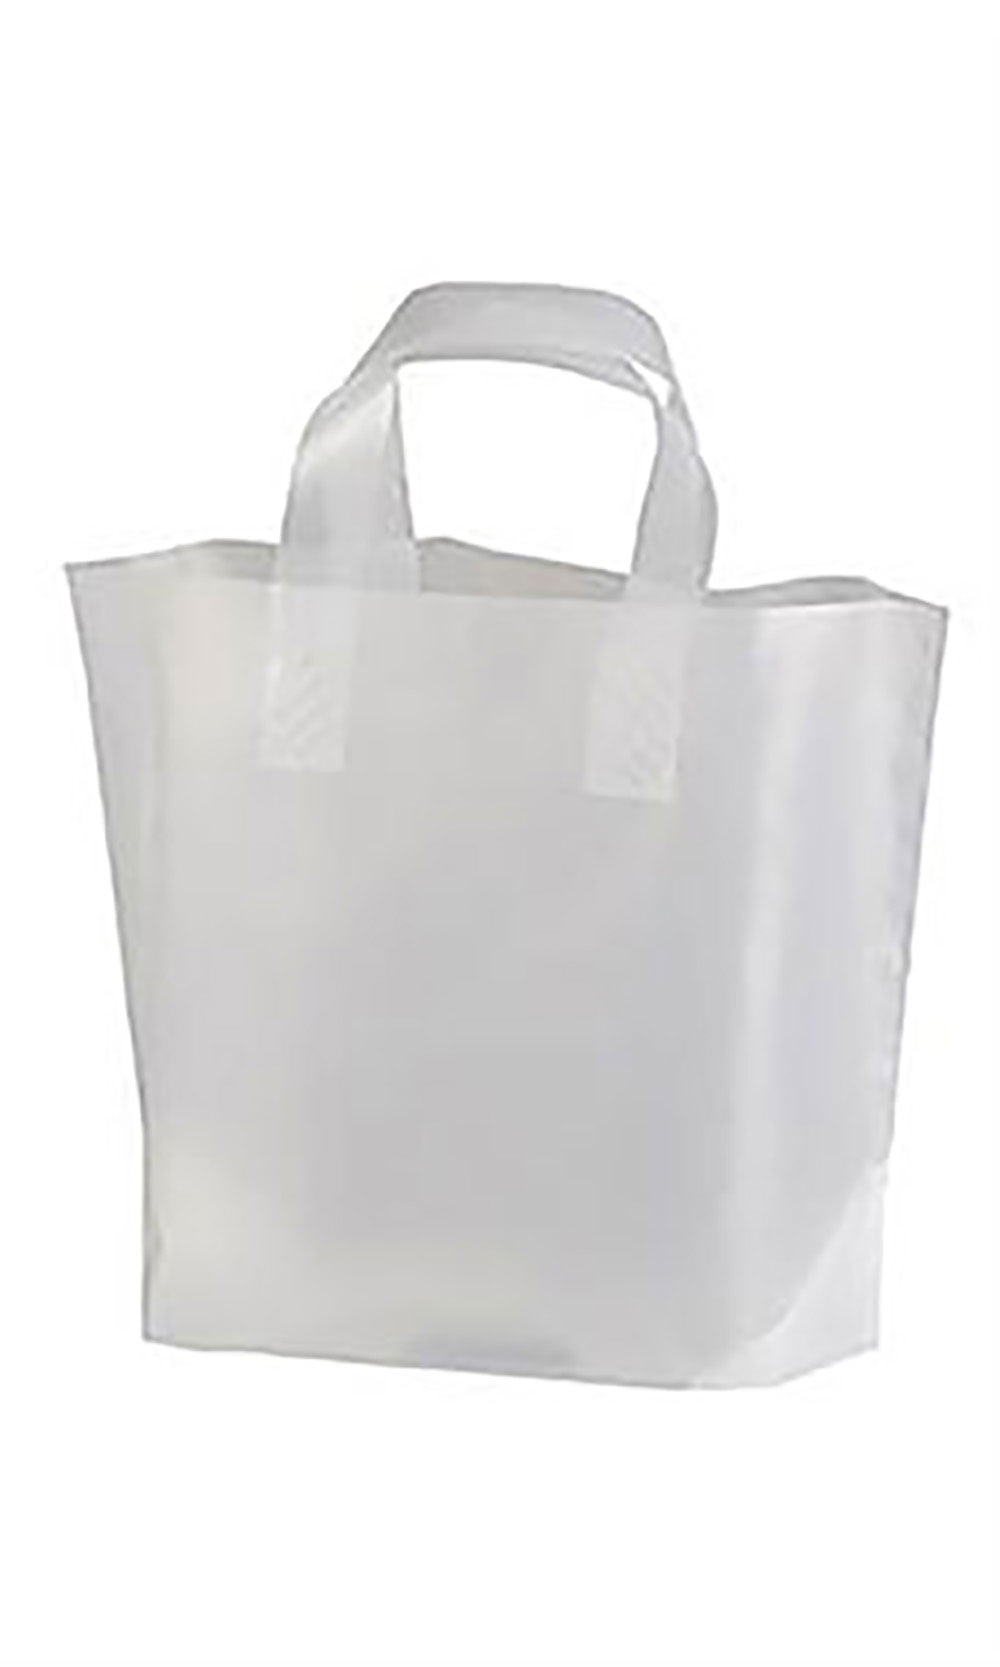 Recycled Clear Frosted Plastic Shopping Bags - (12&quot; x 10&quot; x 4&quot;) Case of 250 - nrd.kbic-nsn.gov